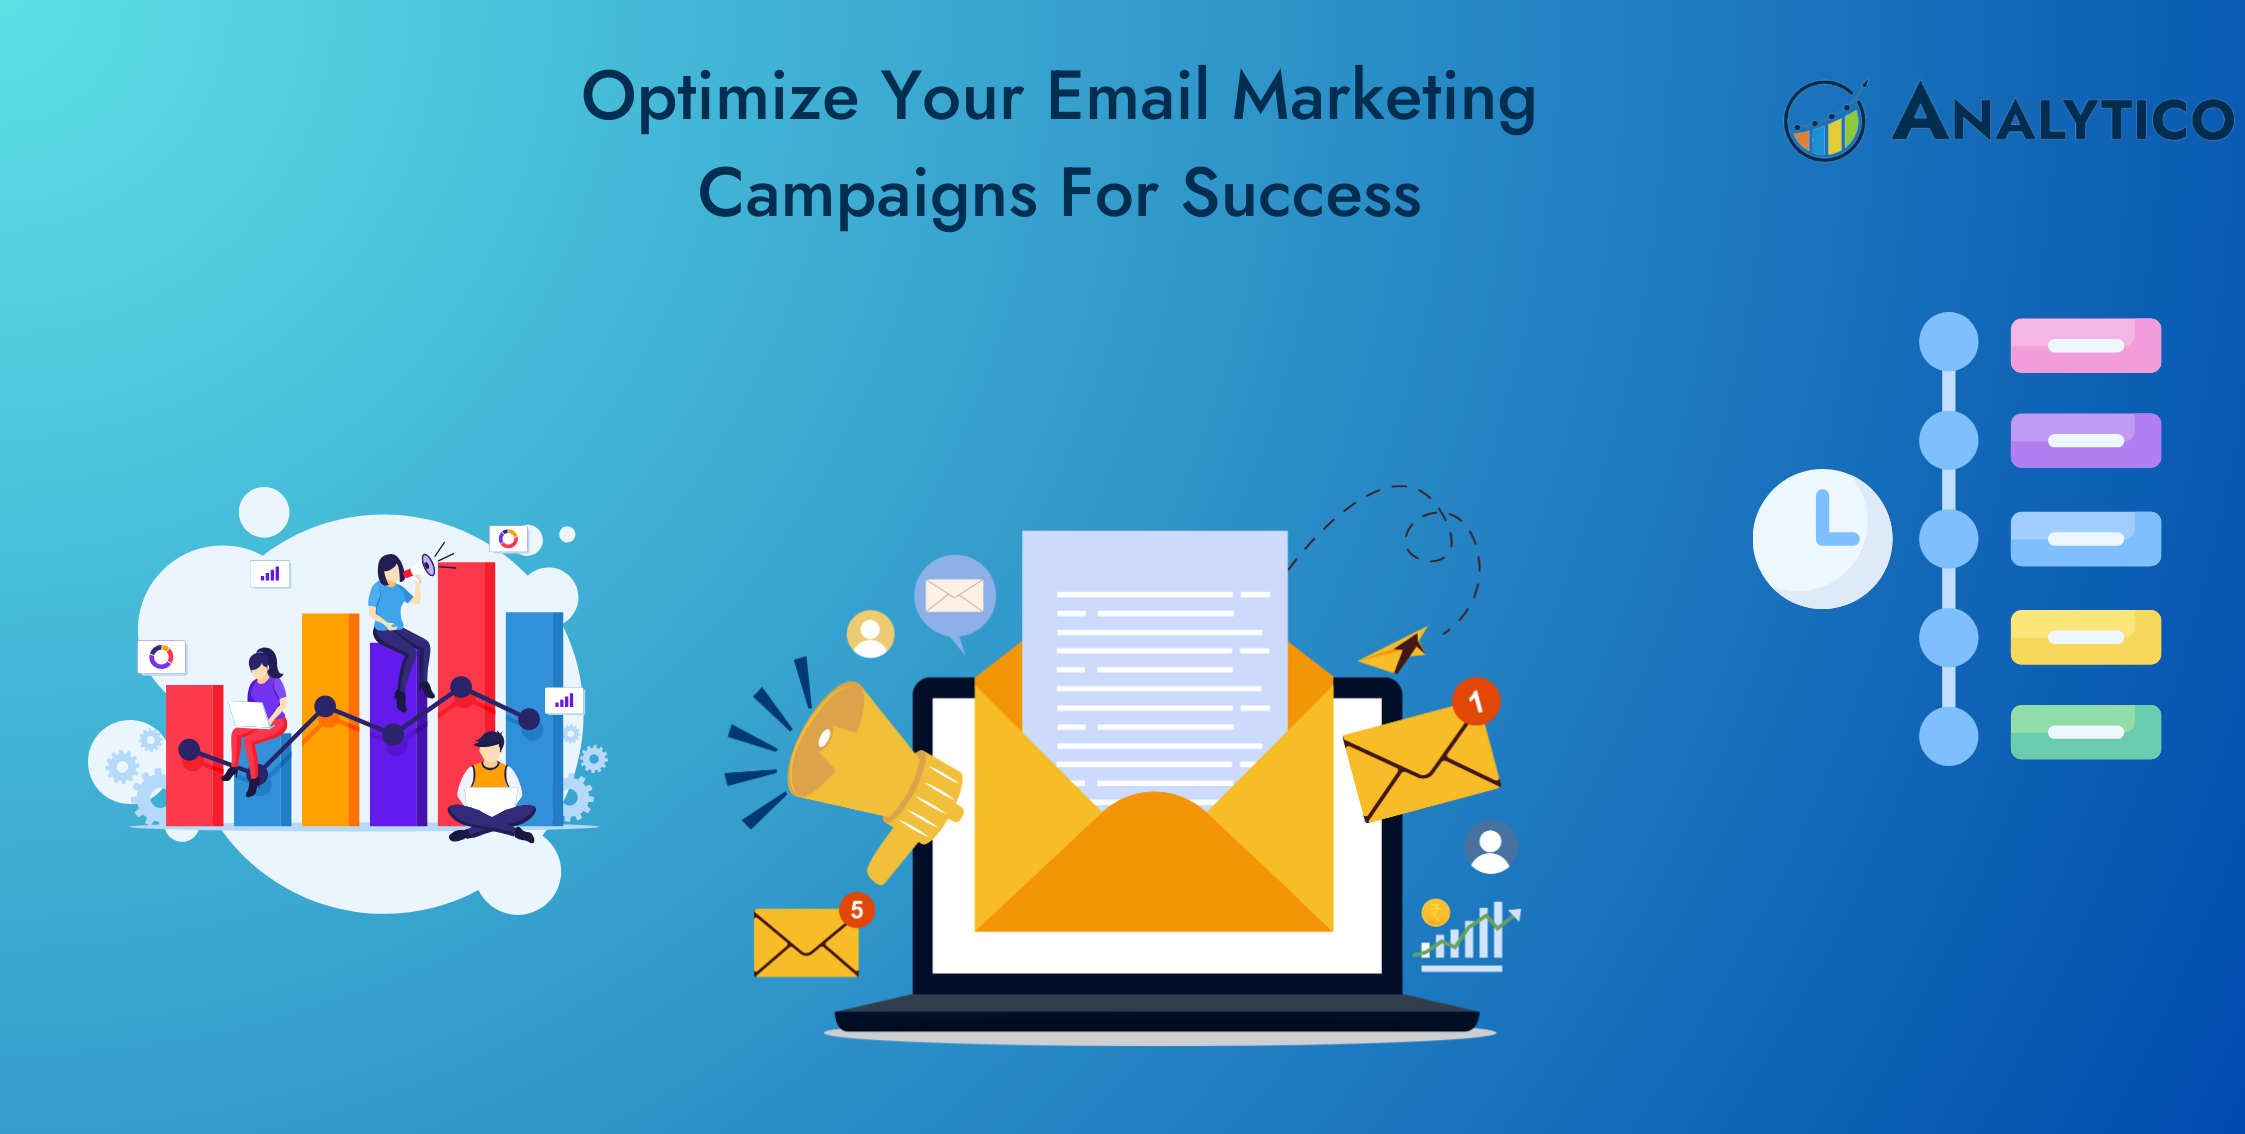 8 Tips to Optimize Your Email Marketing Campaigns For Success